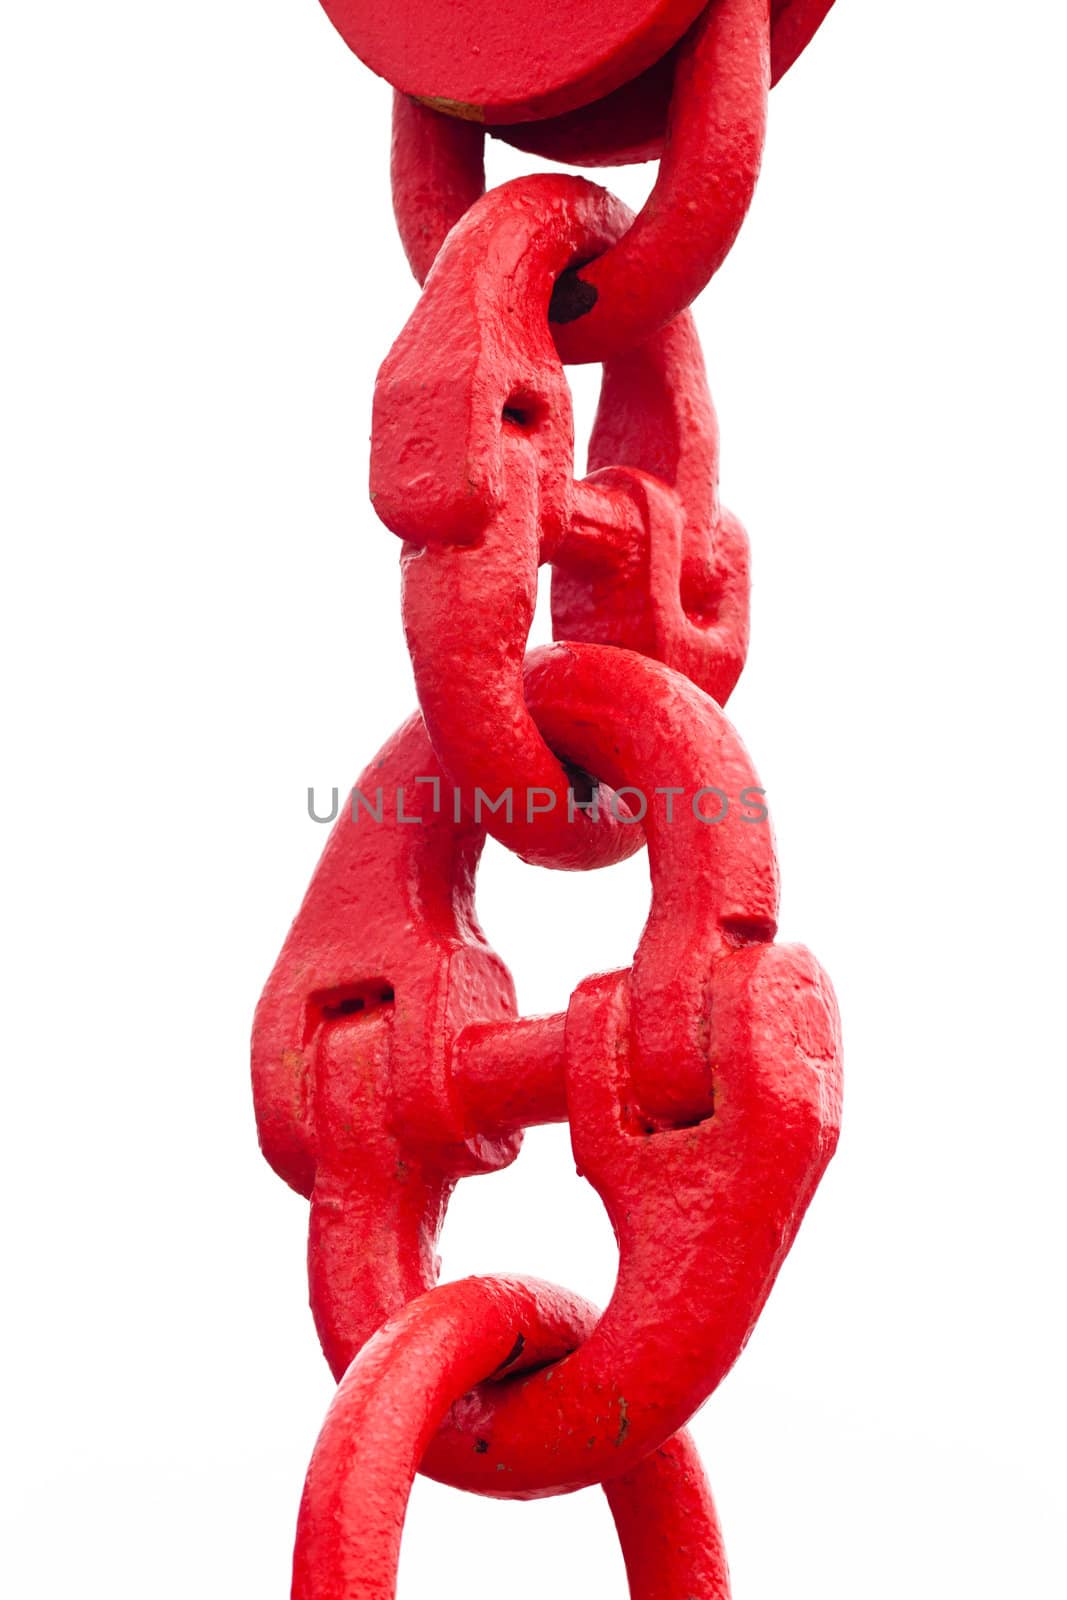 Big painted red chain links isolated on white by PiLens